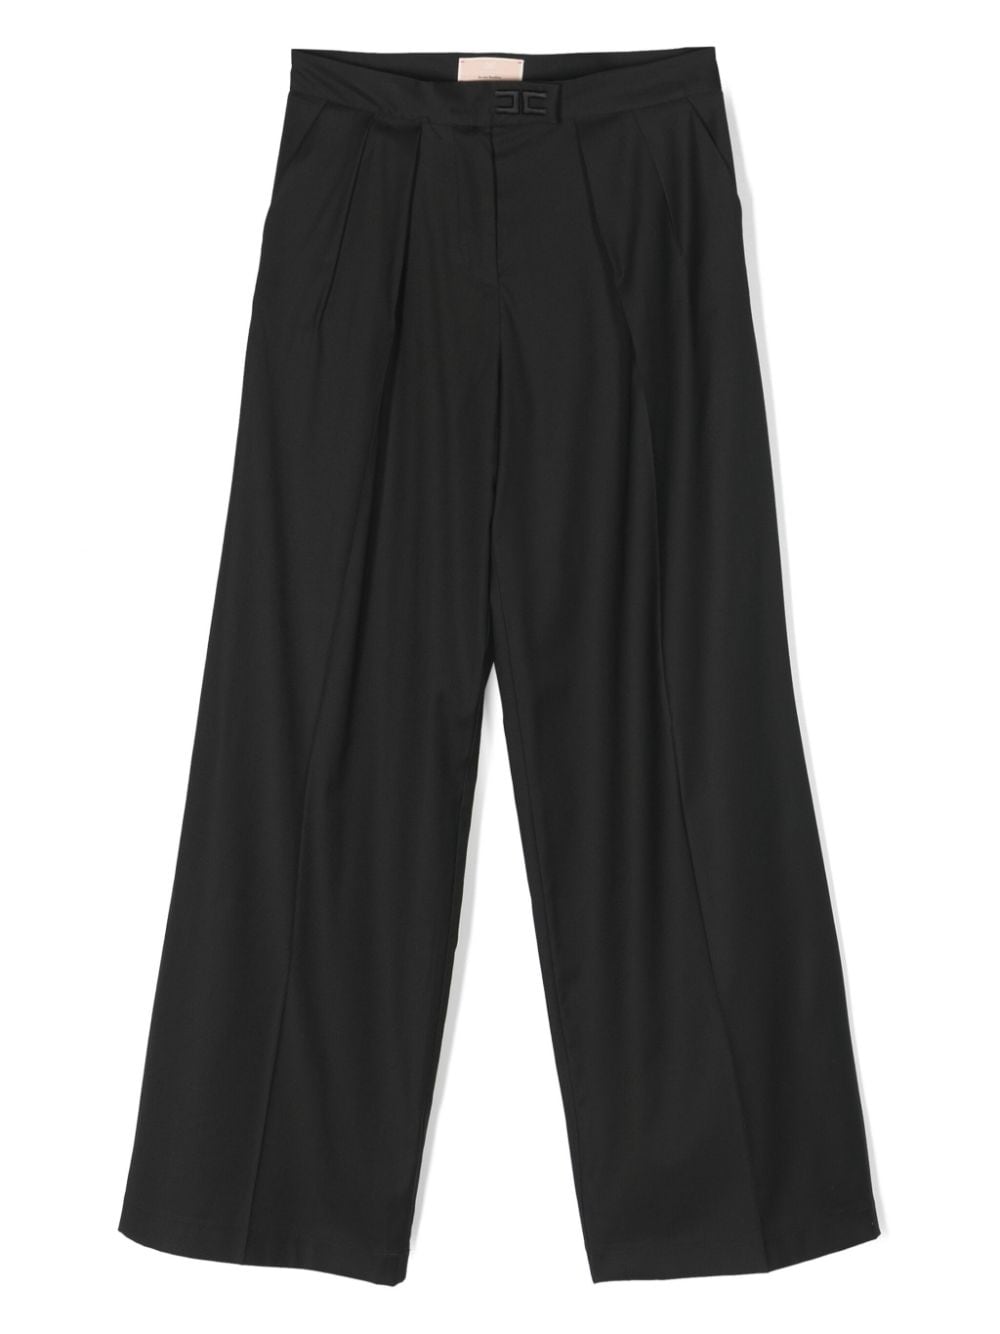 Black twill trousers for girls